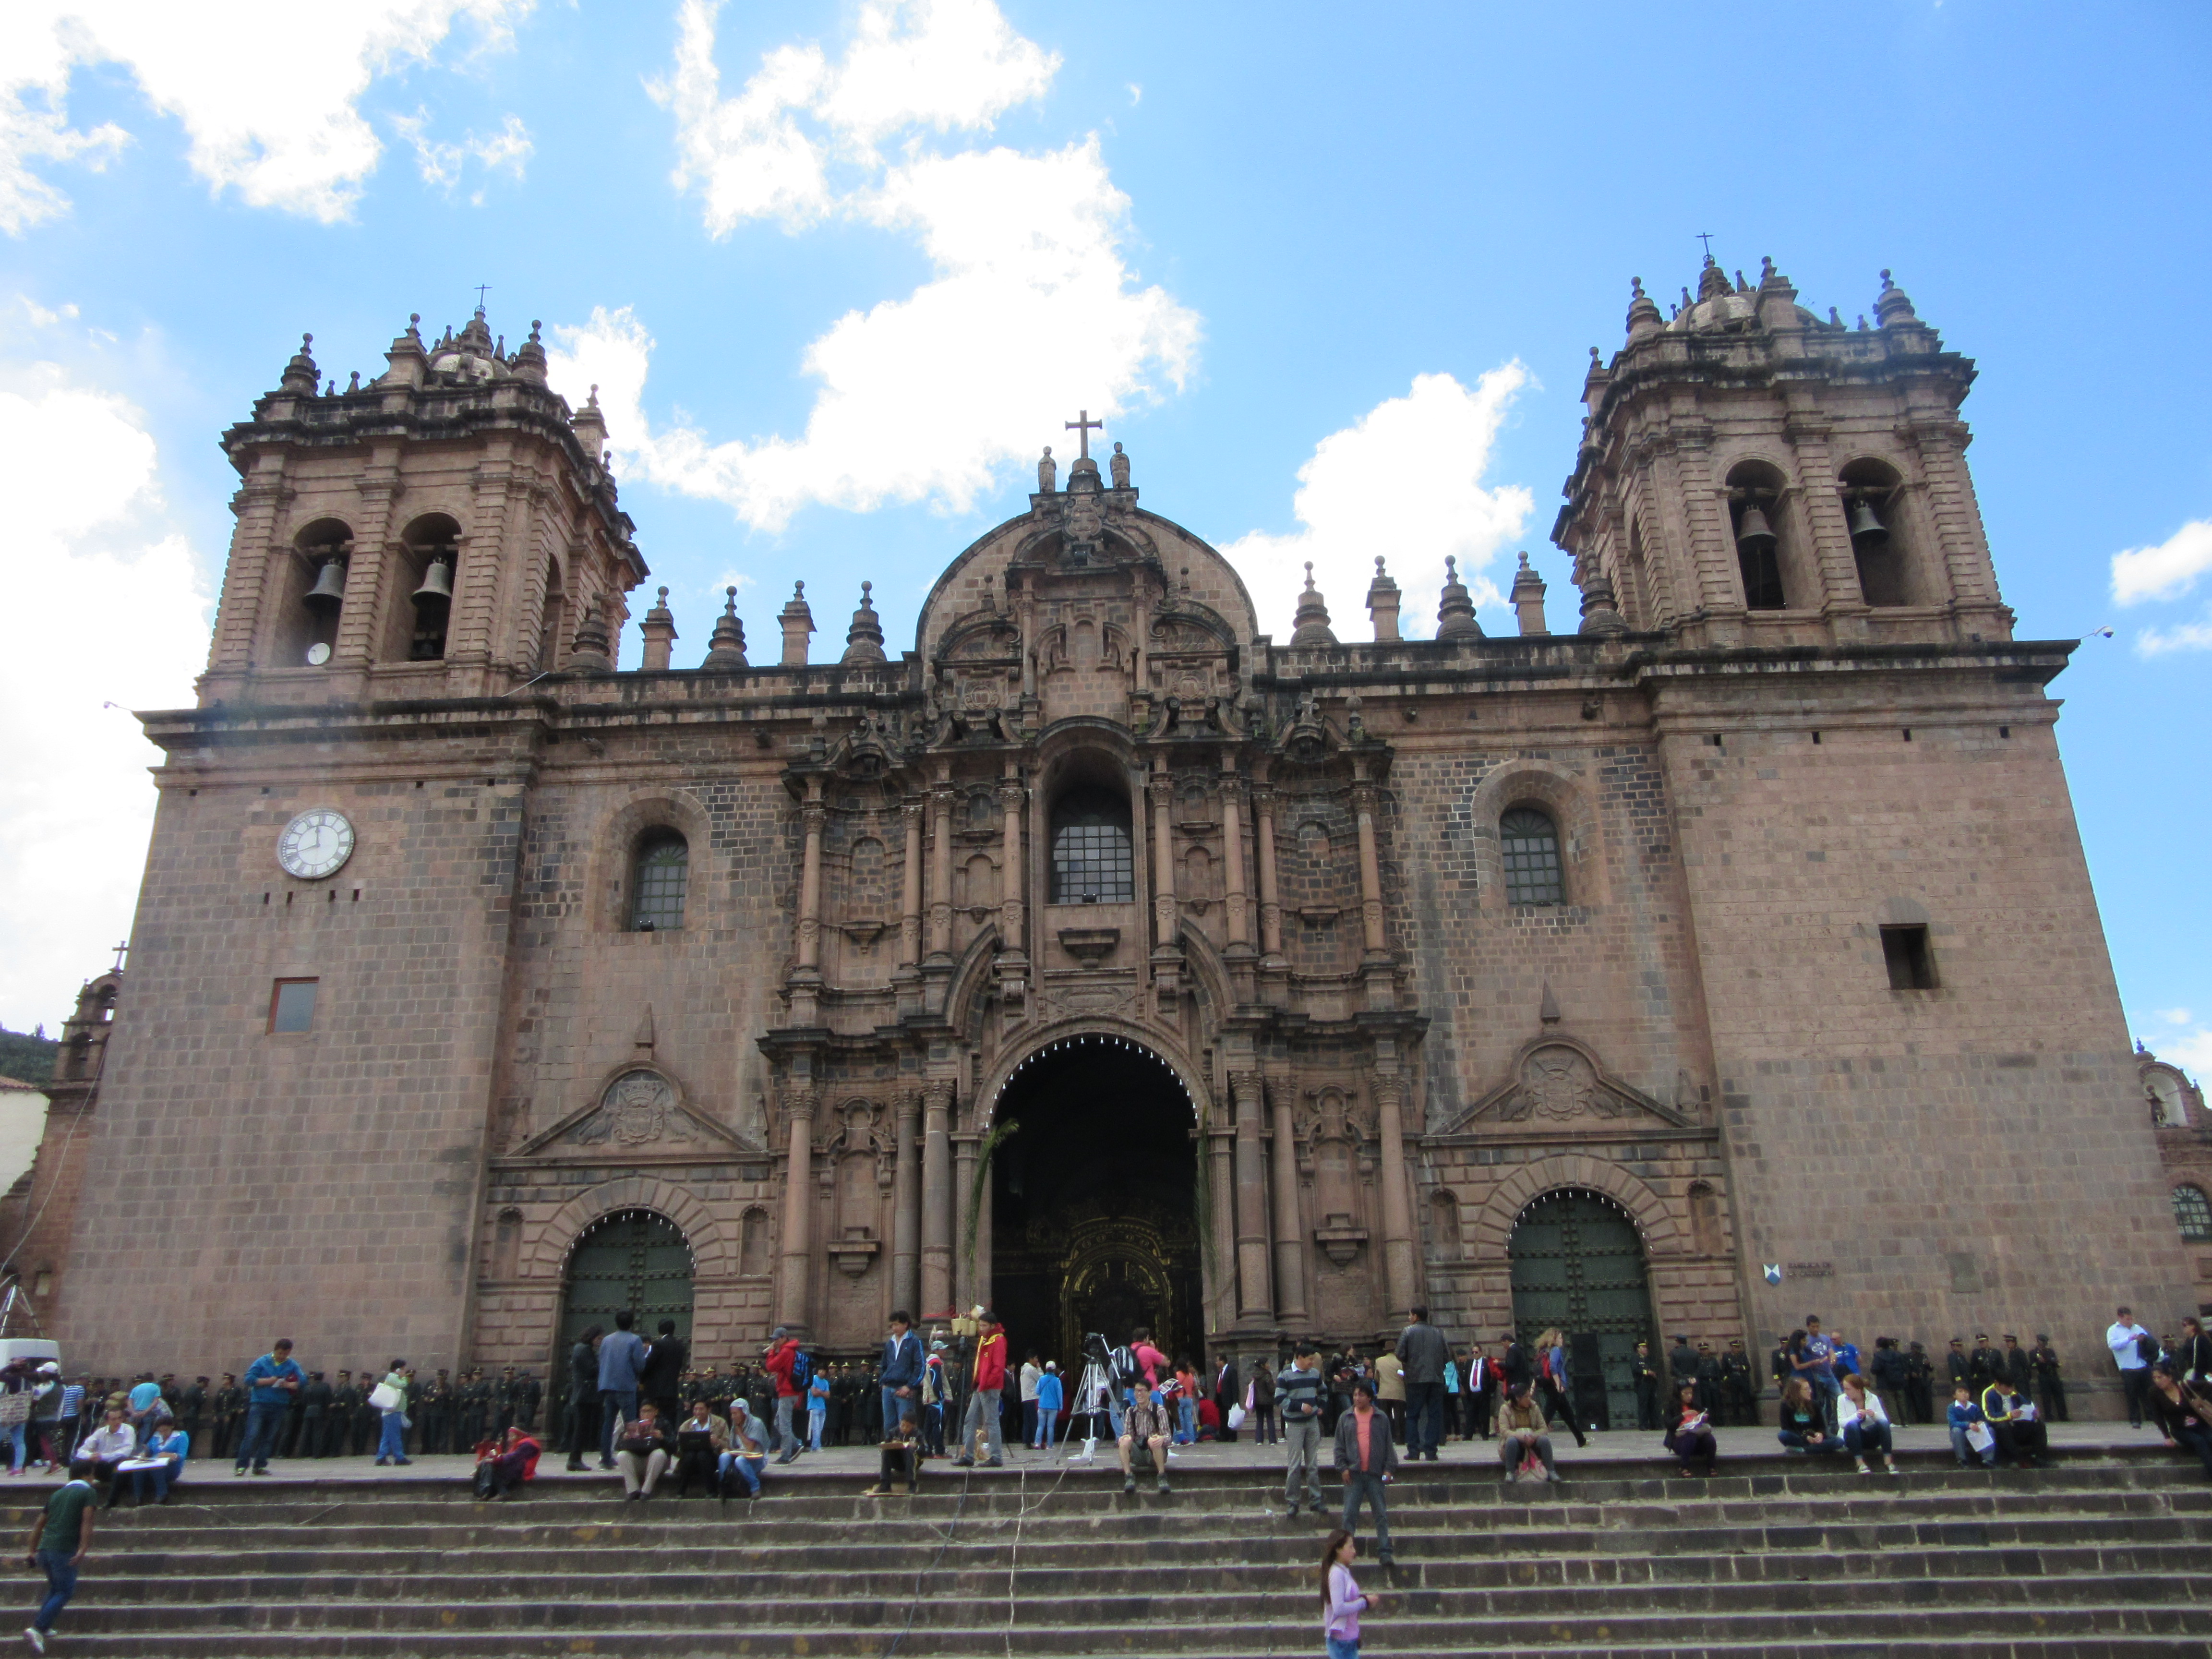 Cathedral Basilica of the Assumption of the Virgin, also known as Cusco Cathedral, is the mother church of the Roman Catholic Archdiocese of Cusco. The cathedral is located on the Plaza de Armas. Building was completed in 1654